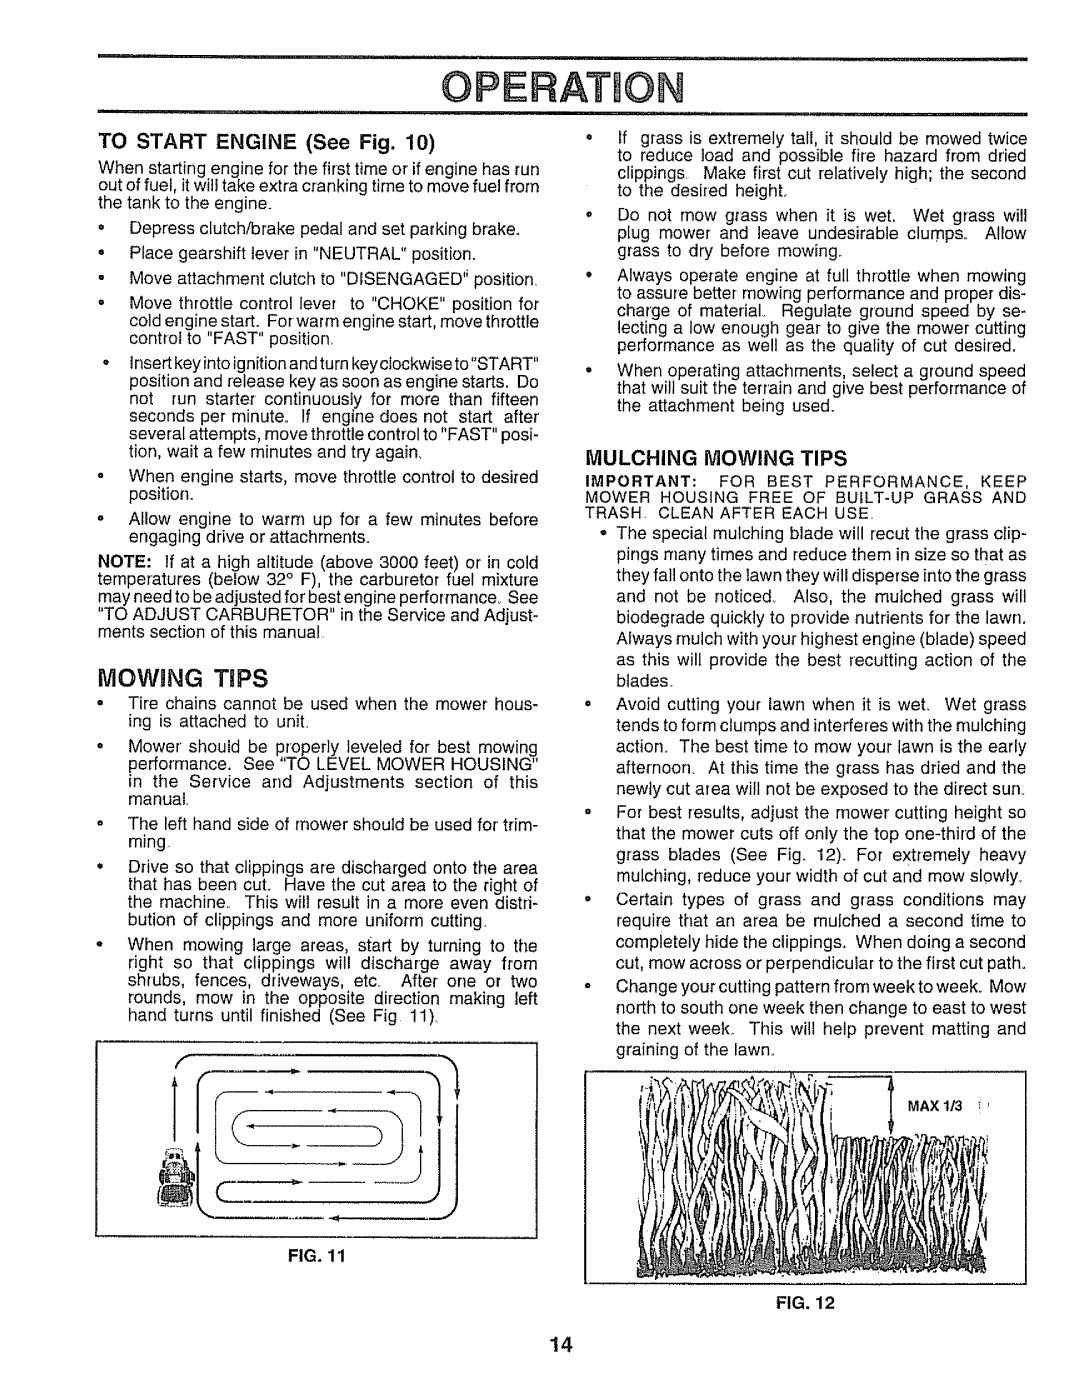 Sears 917.25545 owner manual Operation, MOWING TiPS, Mulching Mowing Tips, Trash Clean After Each Use 